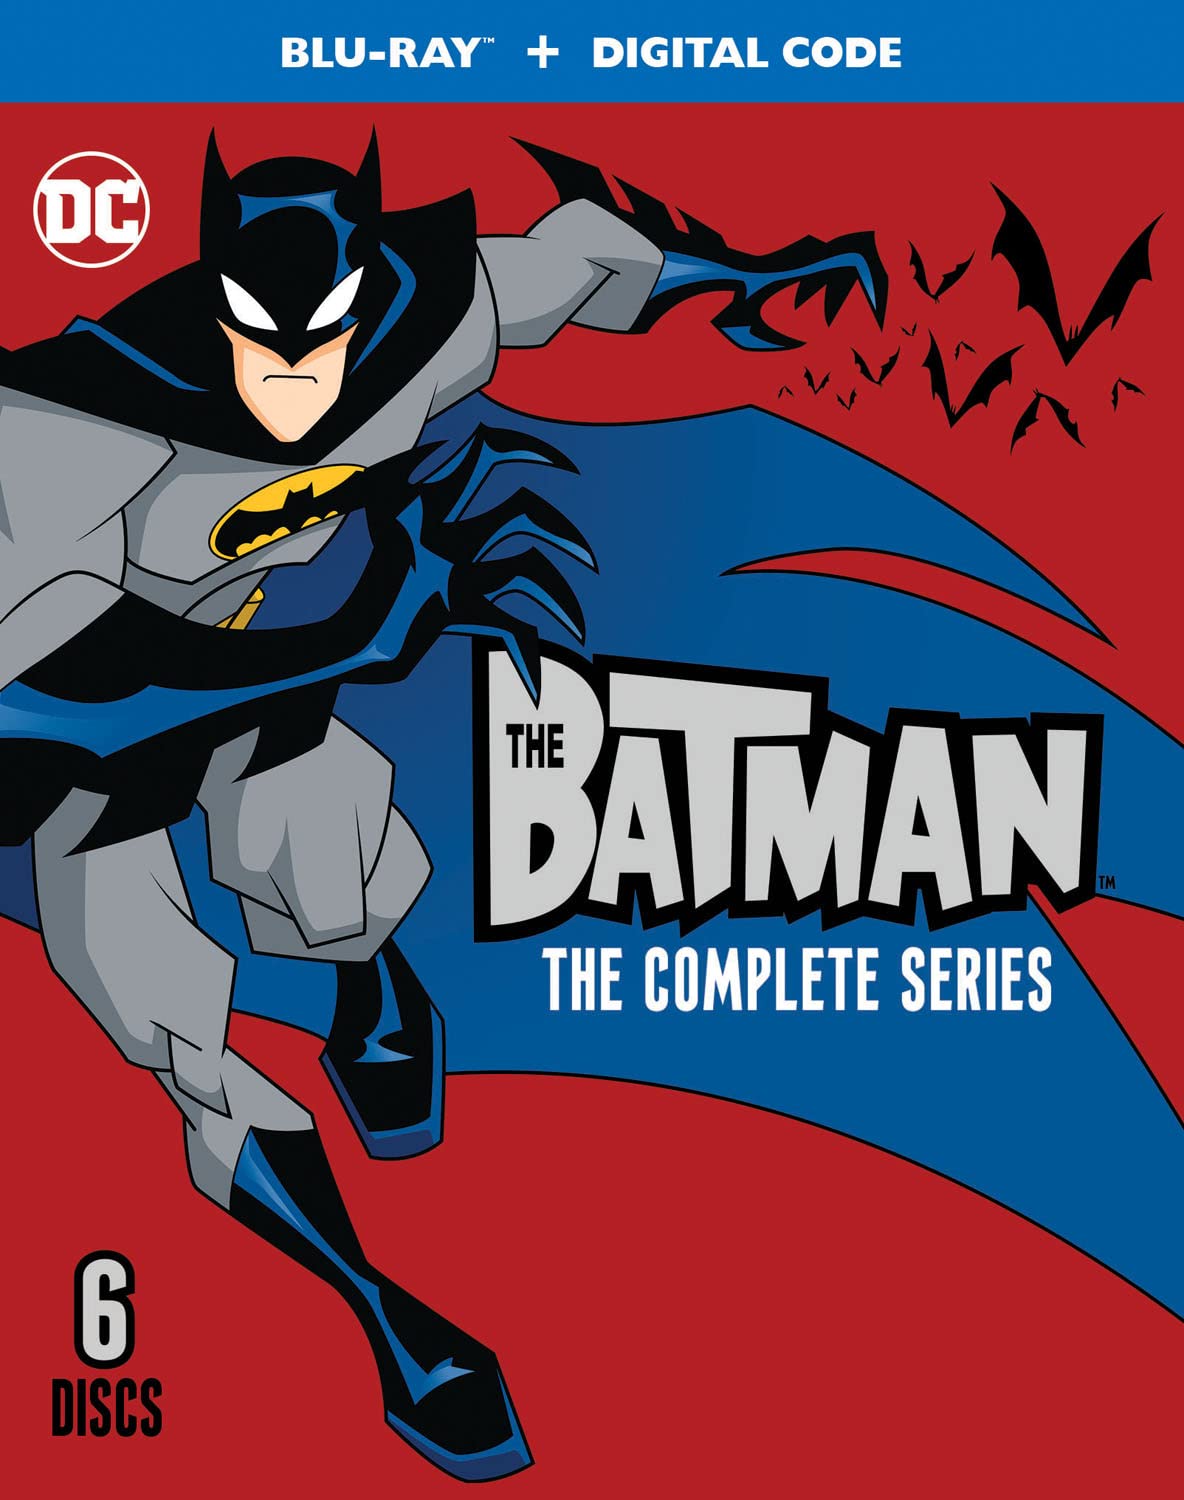 The Batman- The Complete Series Blu-ray